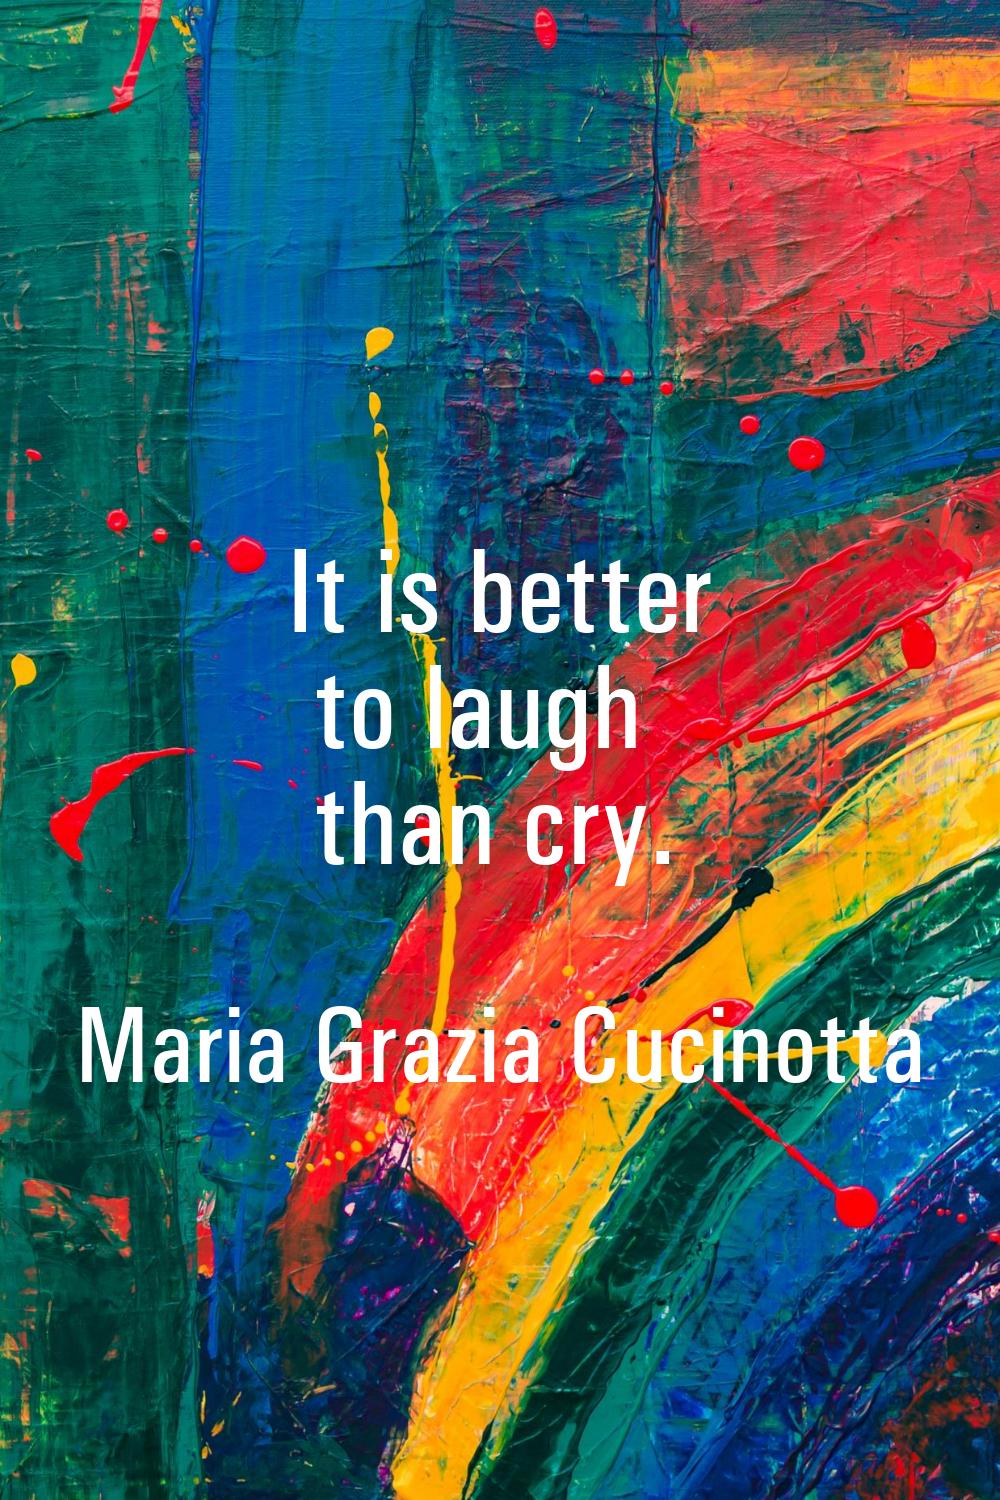 It is better to laugh than cry.